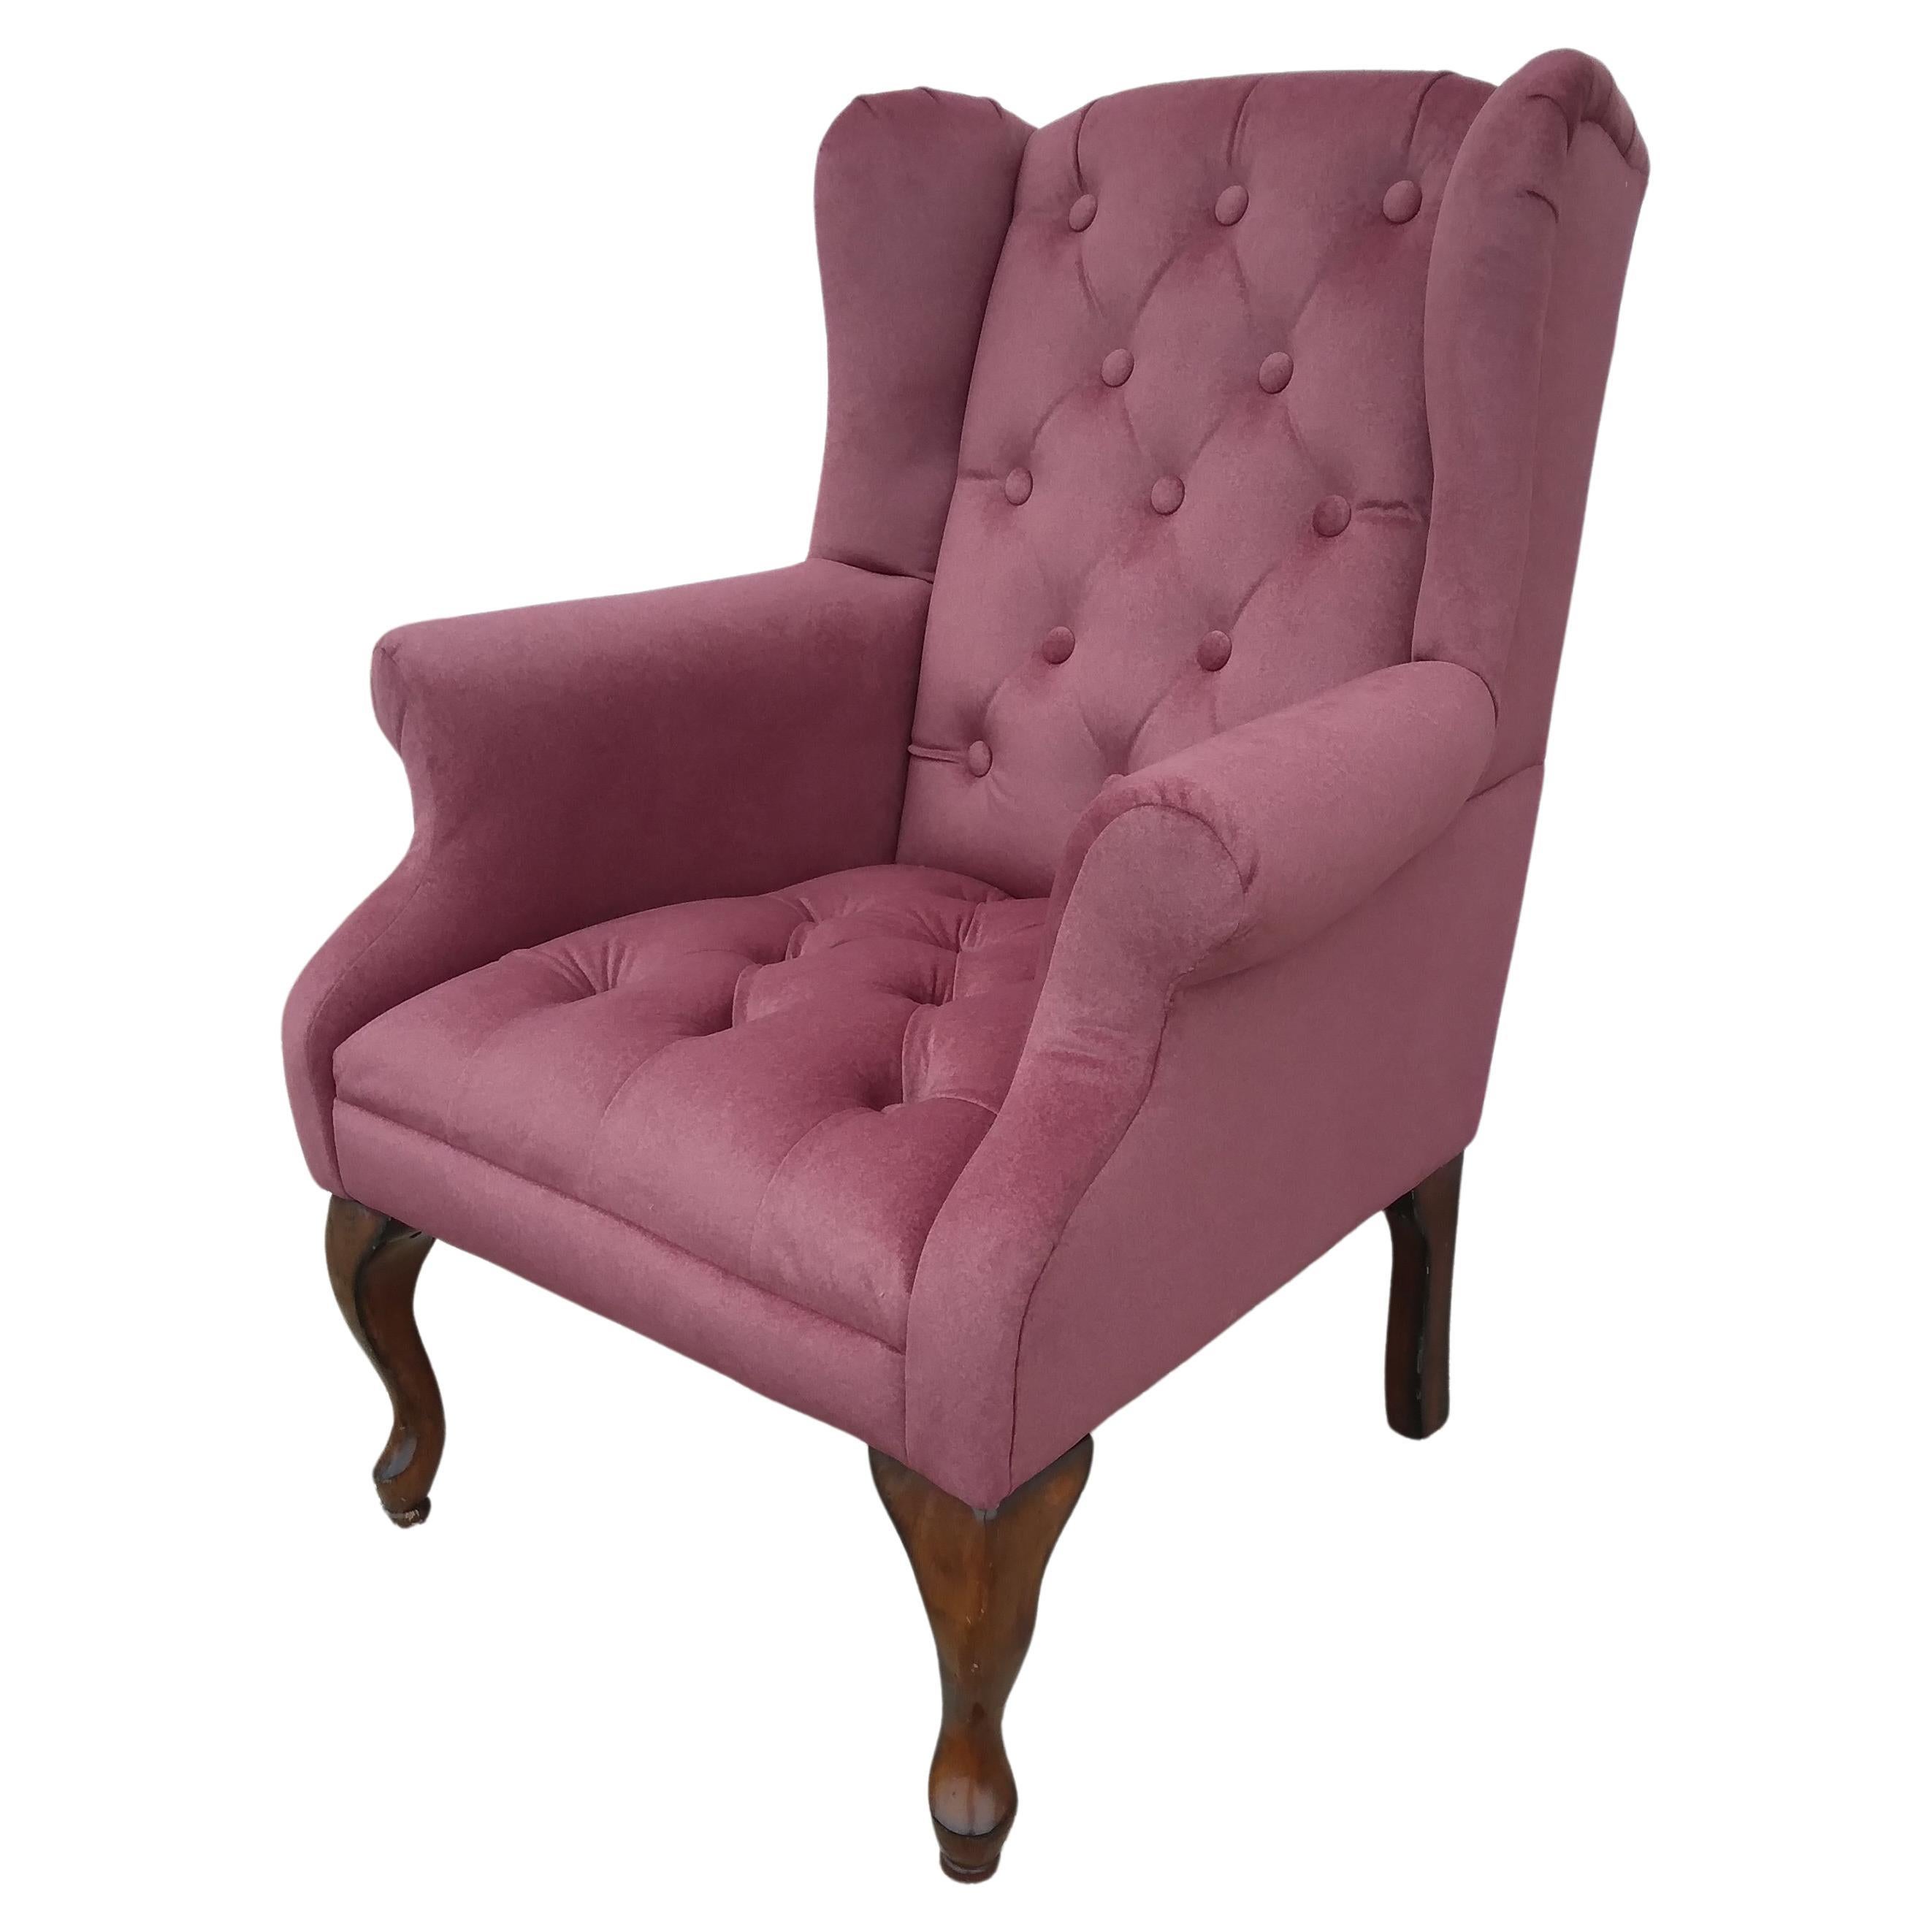 Vintage Tufted Wingback Chair in Pink Chenille For Sale